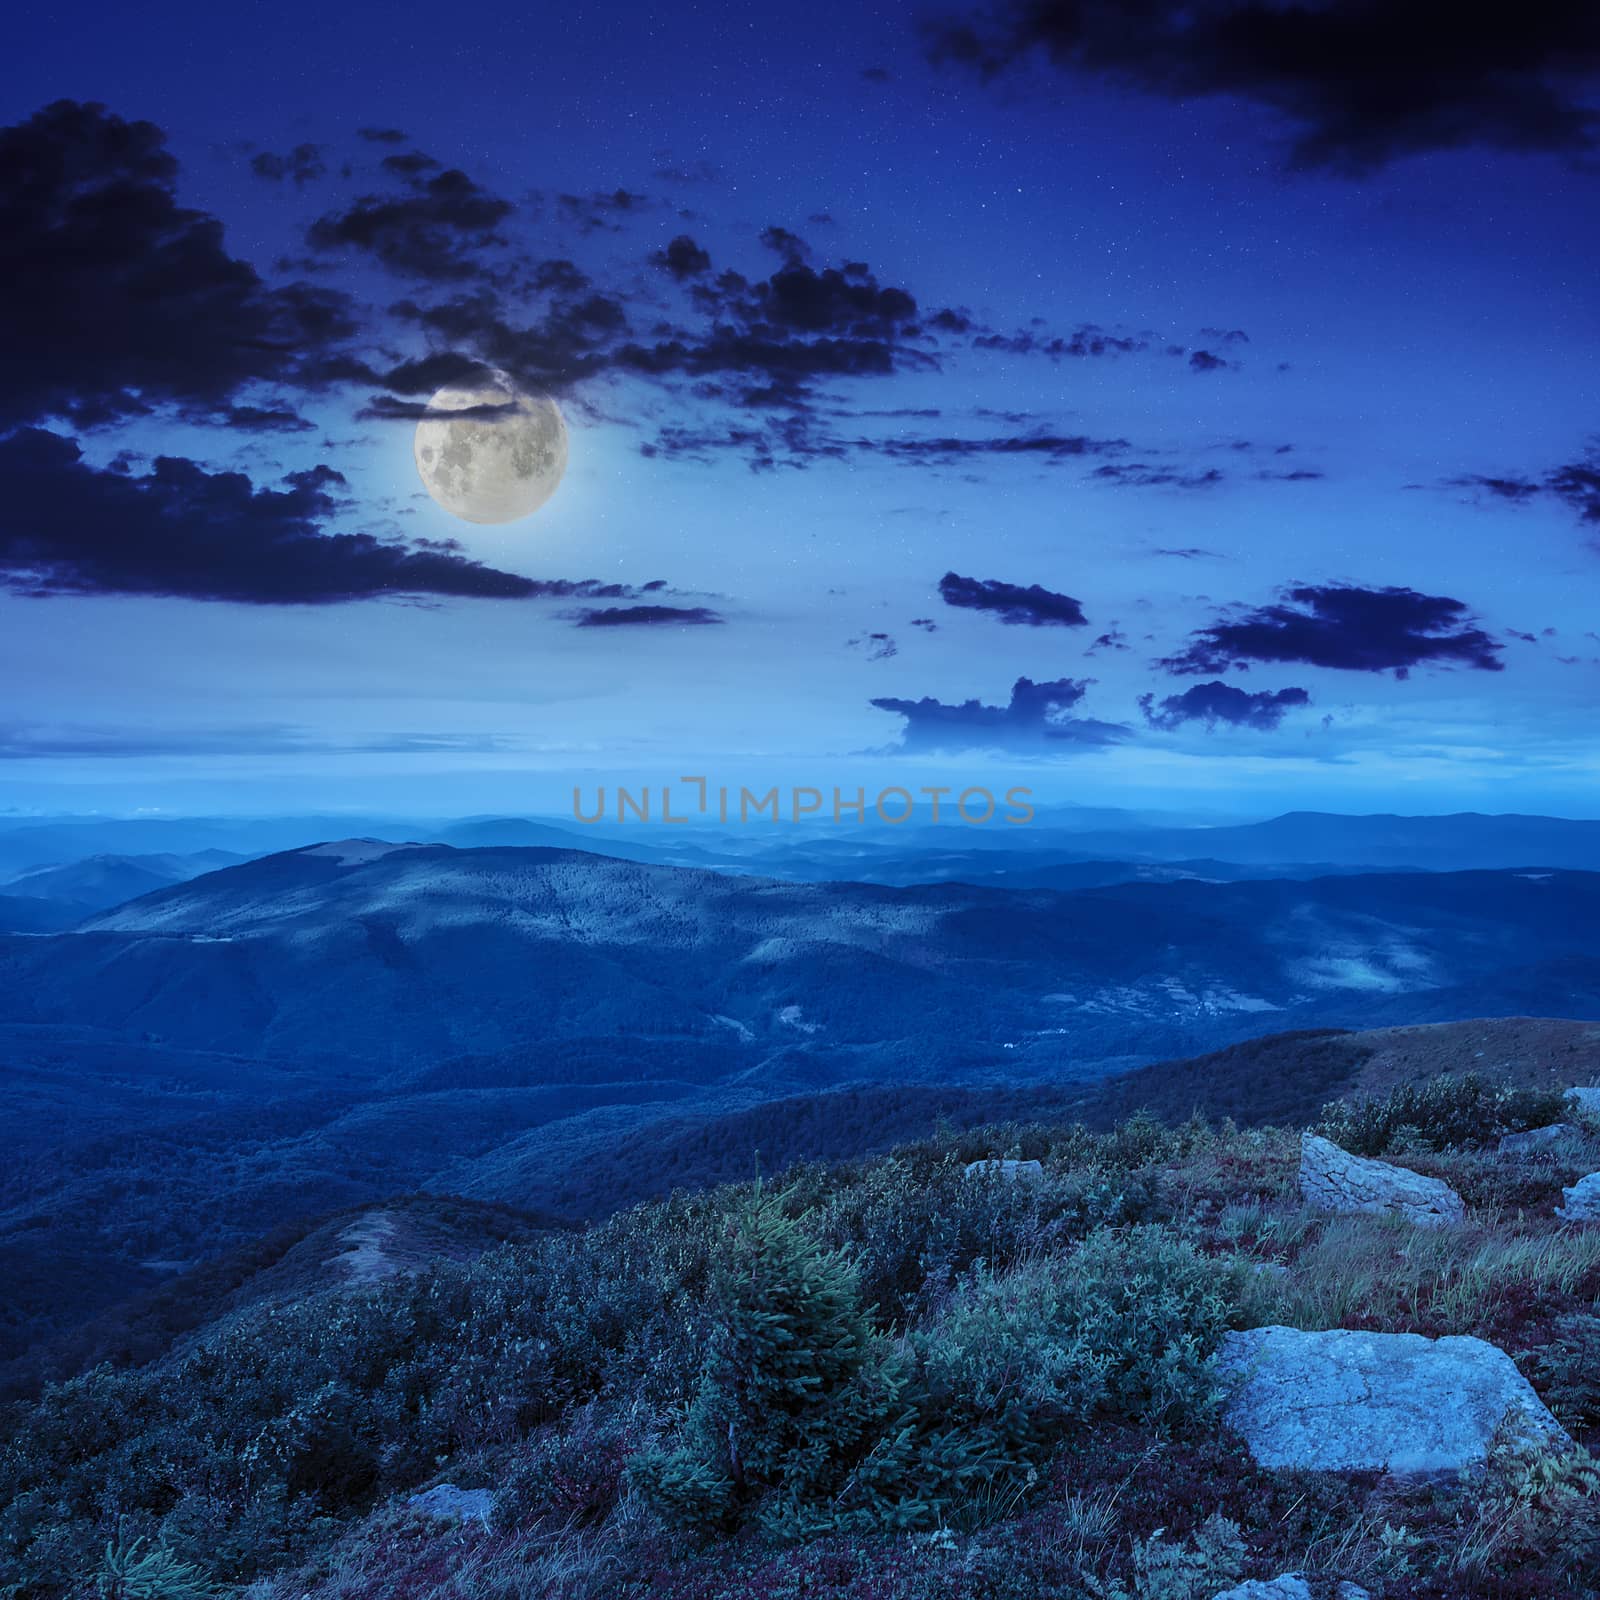 mountain landscape. valley with stones on the hillside. forest on the mountain under the moon light falls on a clearing at the top of the hill at night.